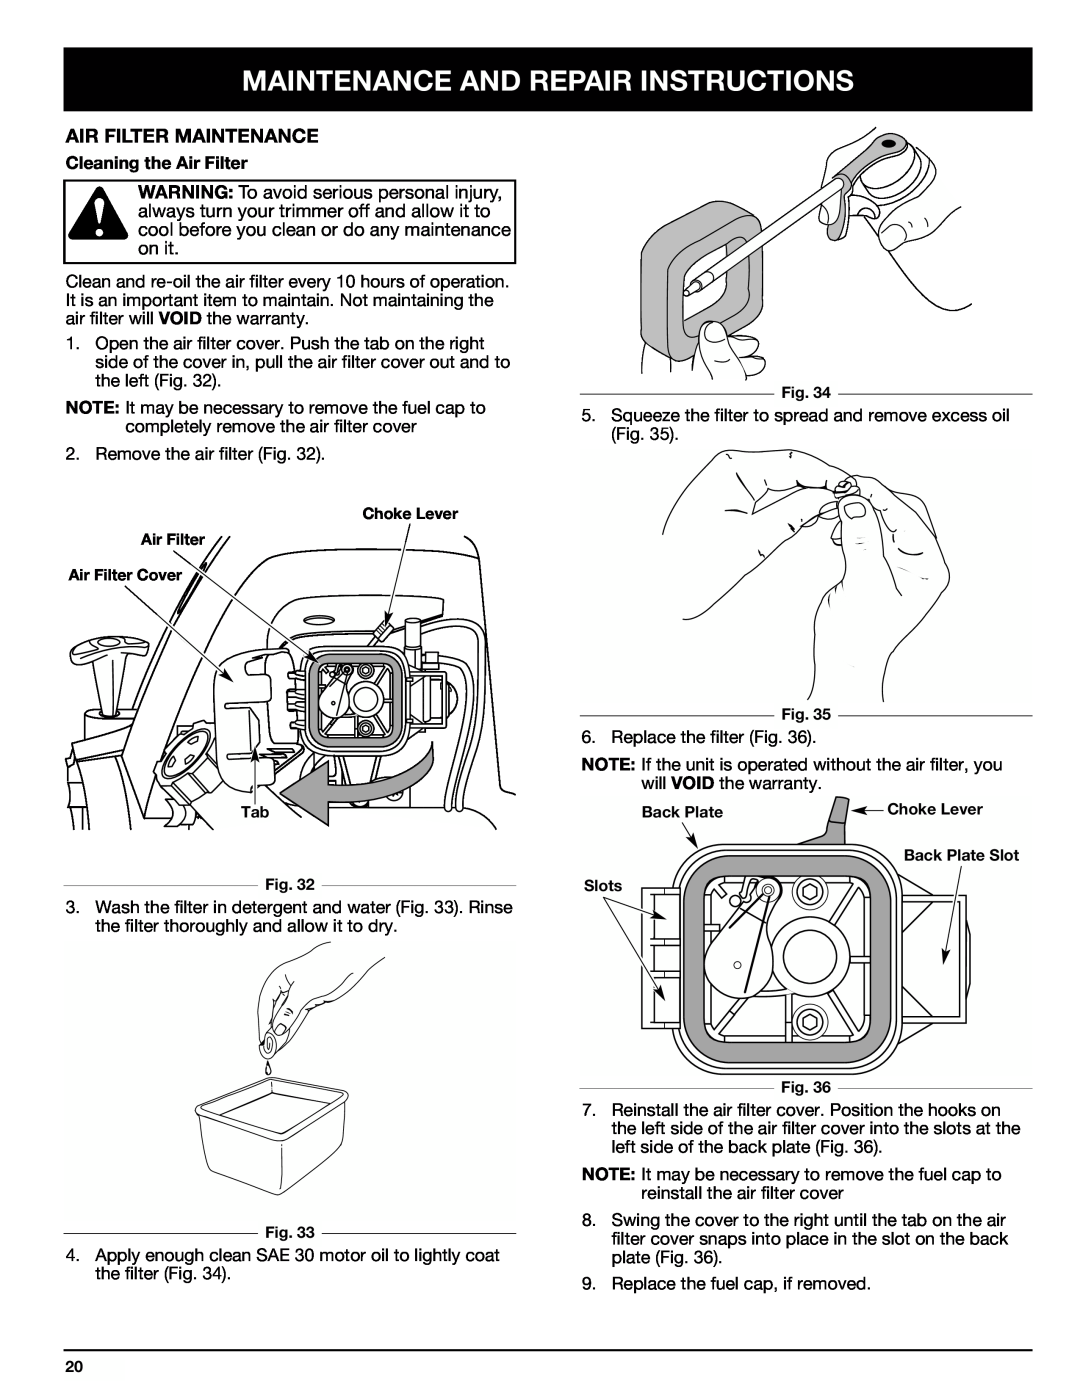 Ryobi Outdoor 875r manual Air Filter Maintenance, Maintenance And Repair Instructions, Cleaning the Air Filter 